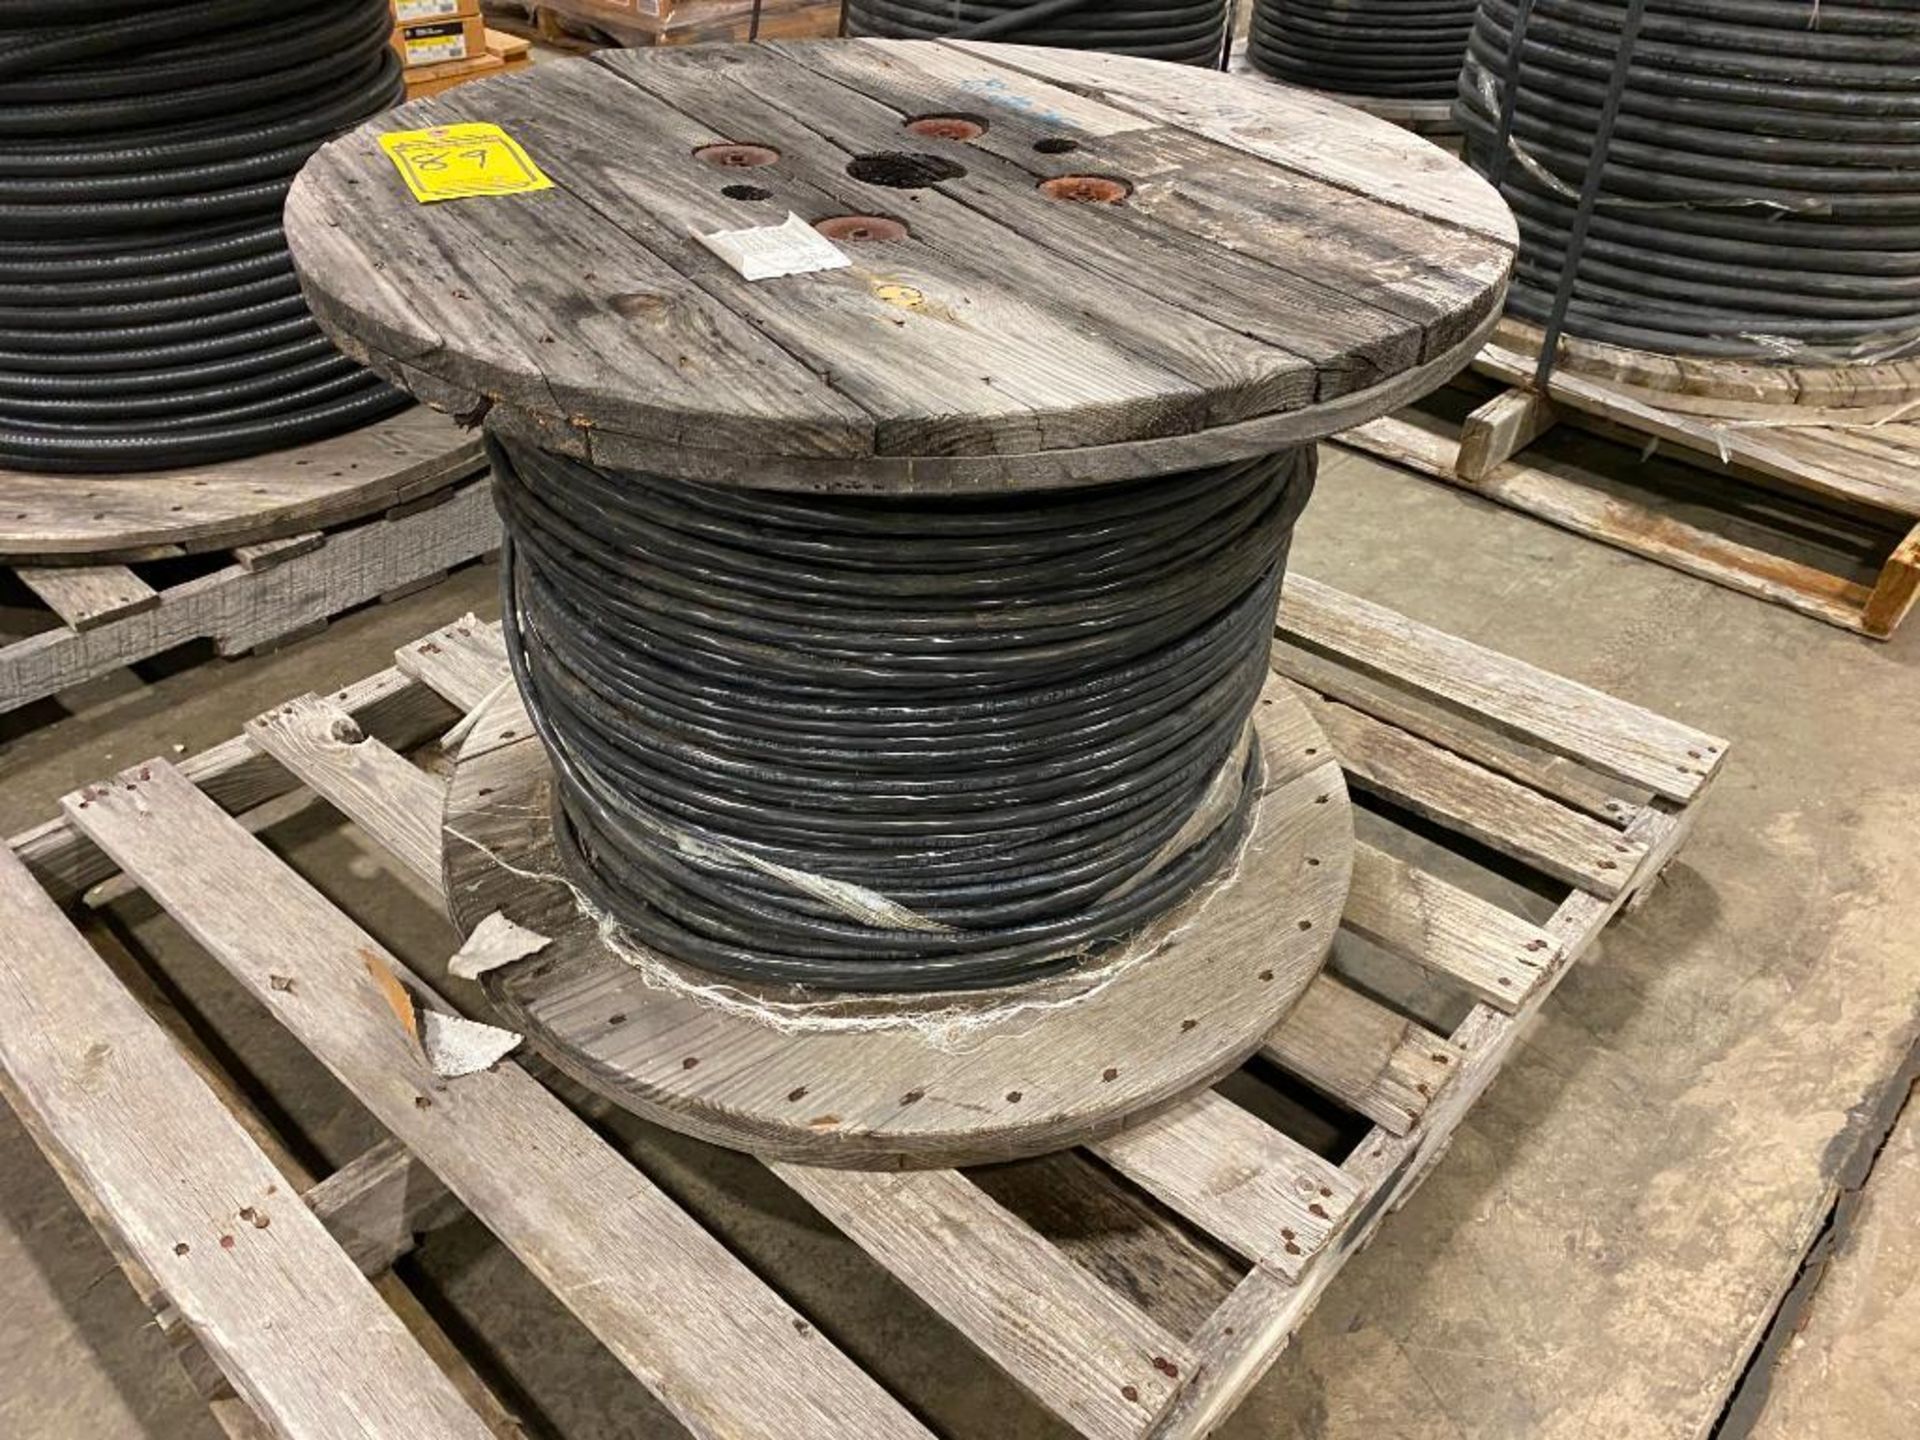 Spool of 3-Strand Electrical Wire